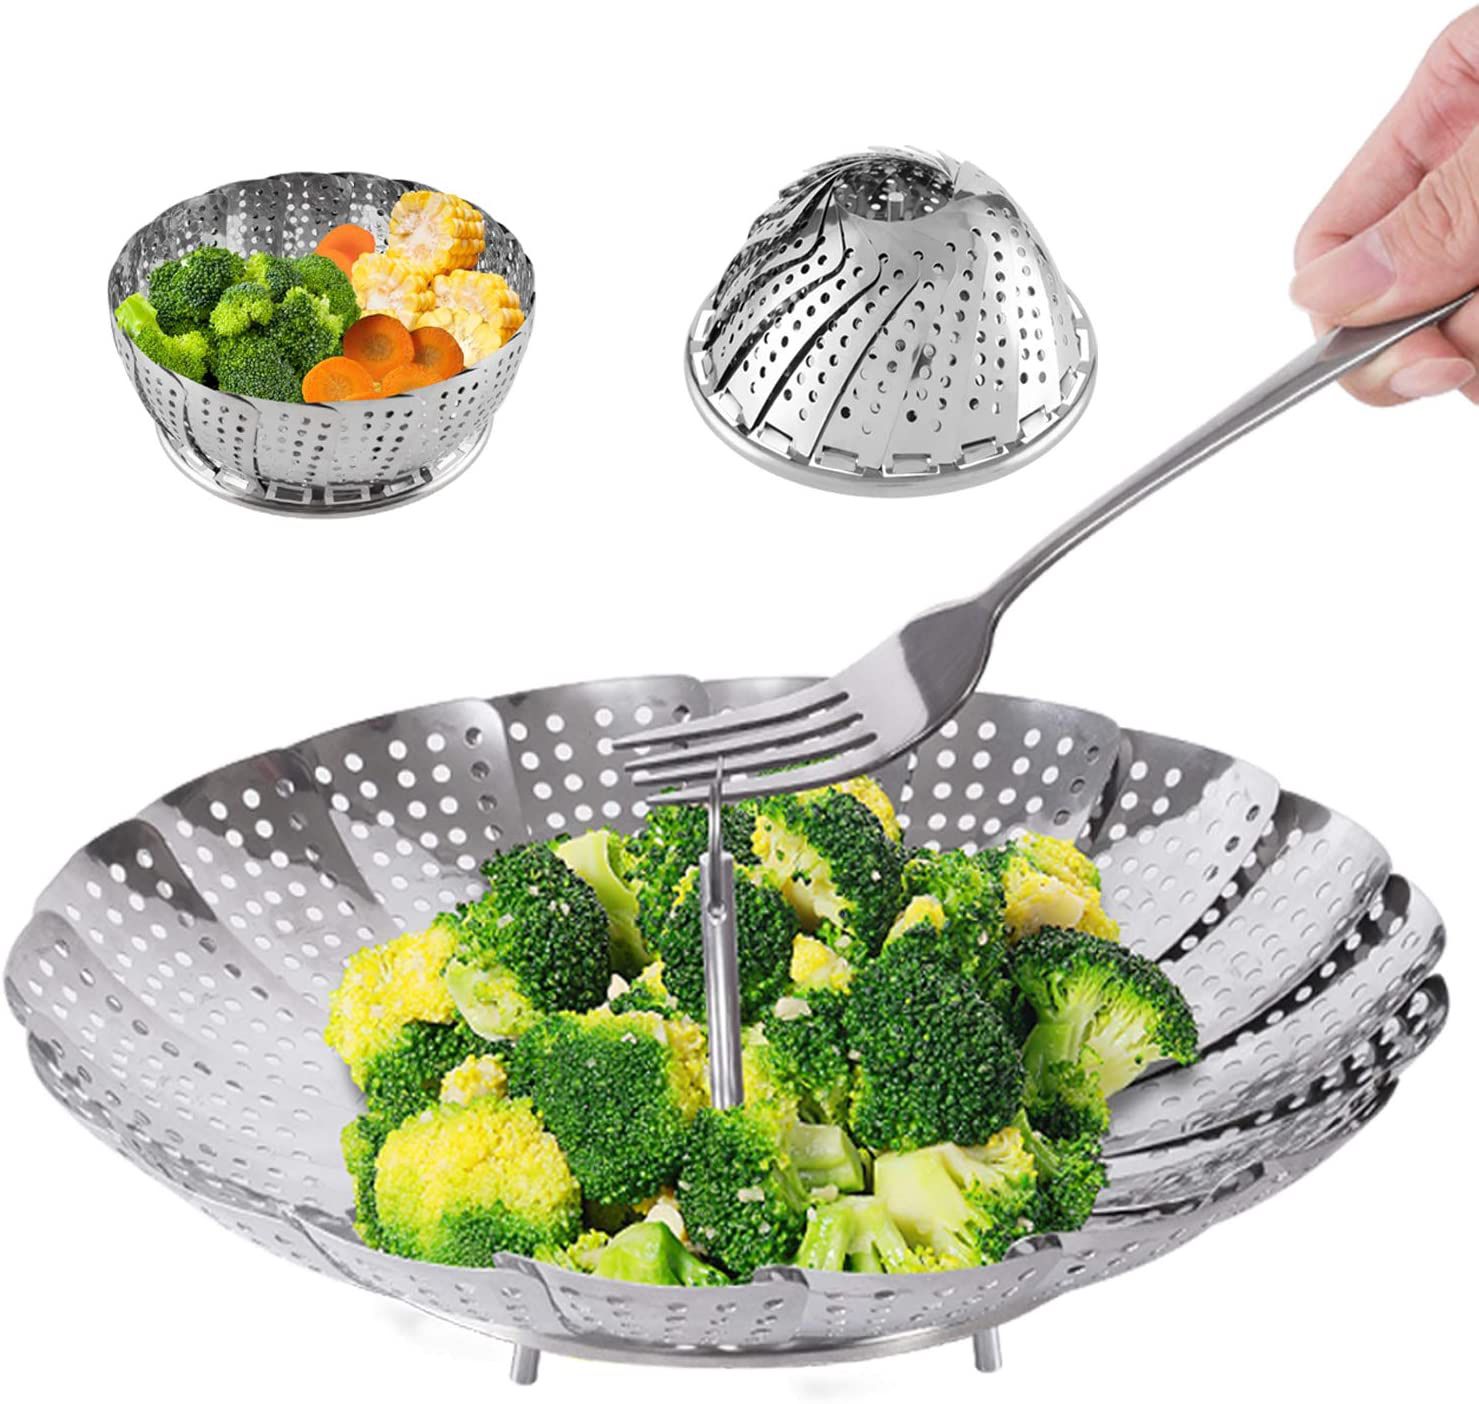 Brand New Stainless Steel Vegetable Steamer Basket Insert For Instant Pots and other Pots